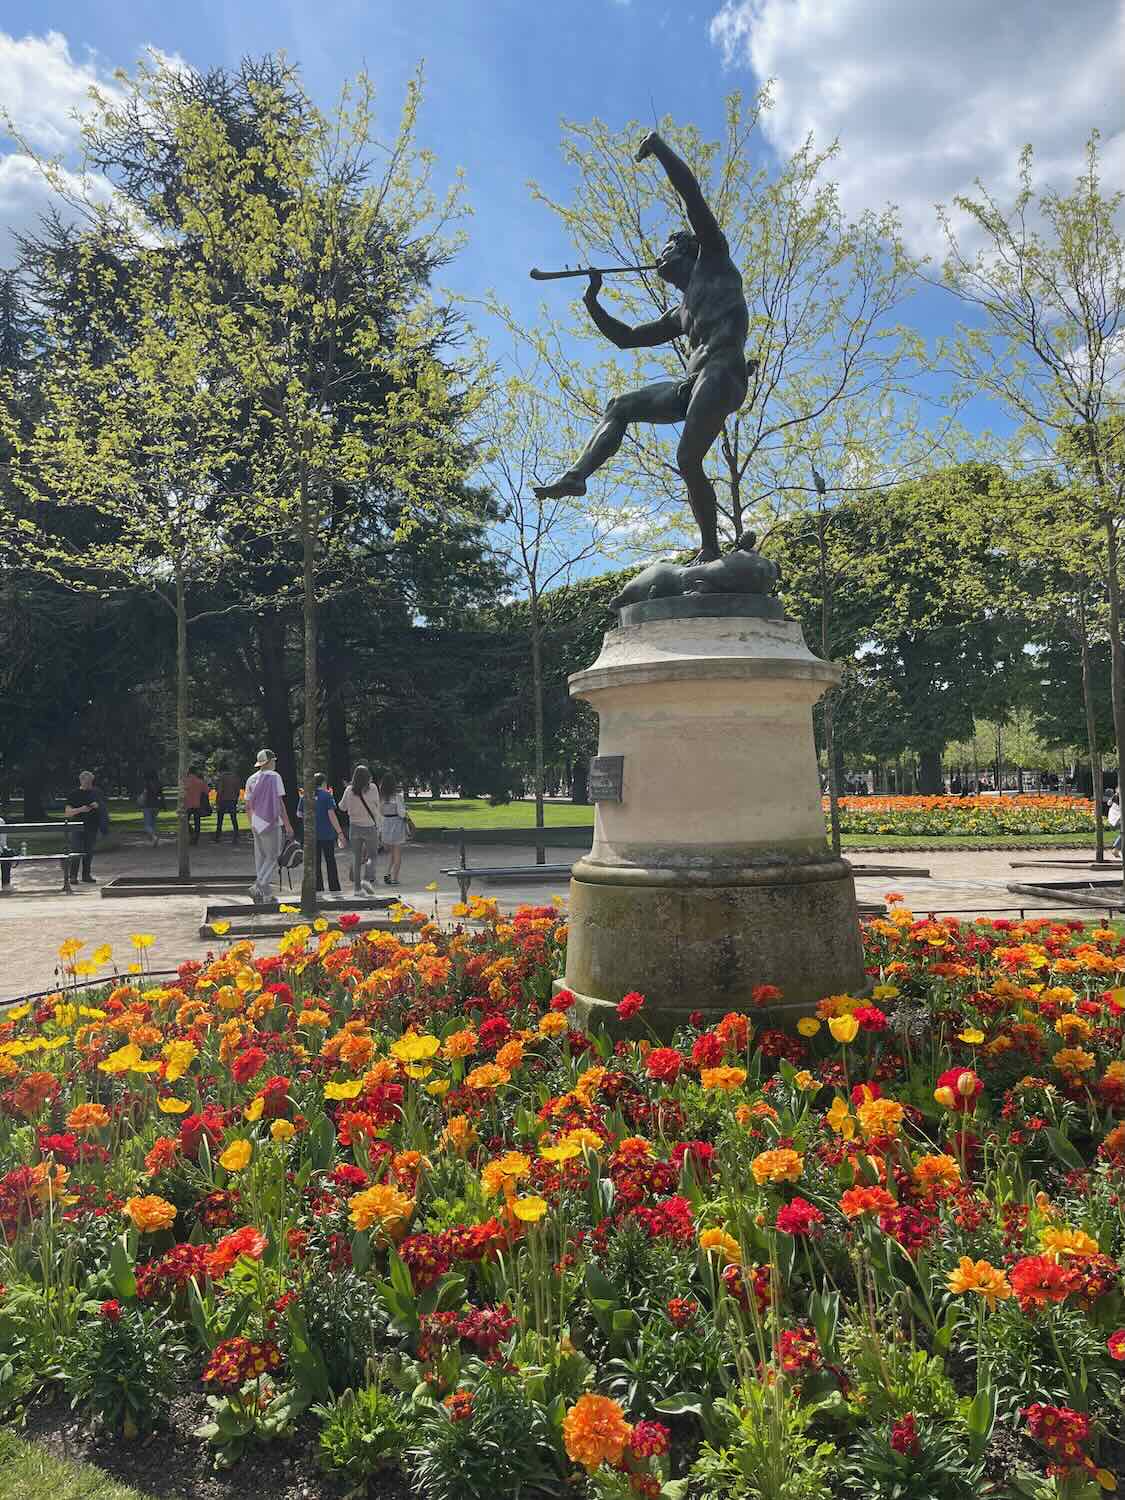 the famous Jardin du Luxembourg in Paris, featuring a bronze statue of a hunter surrounded by vibrant flowerbeds of red and orange marigolds under a sunny sky.